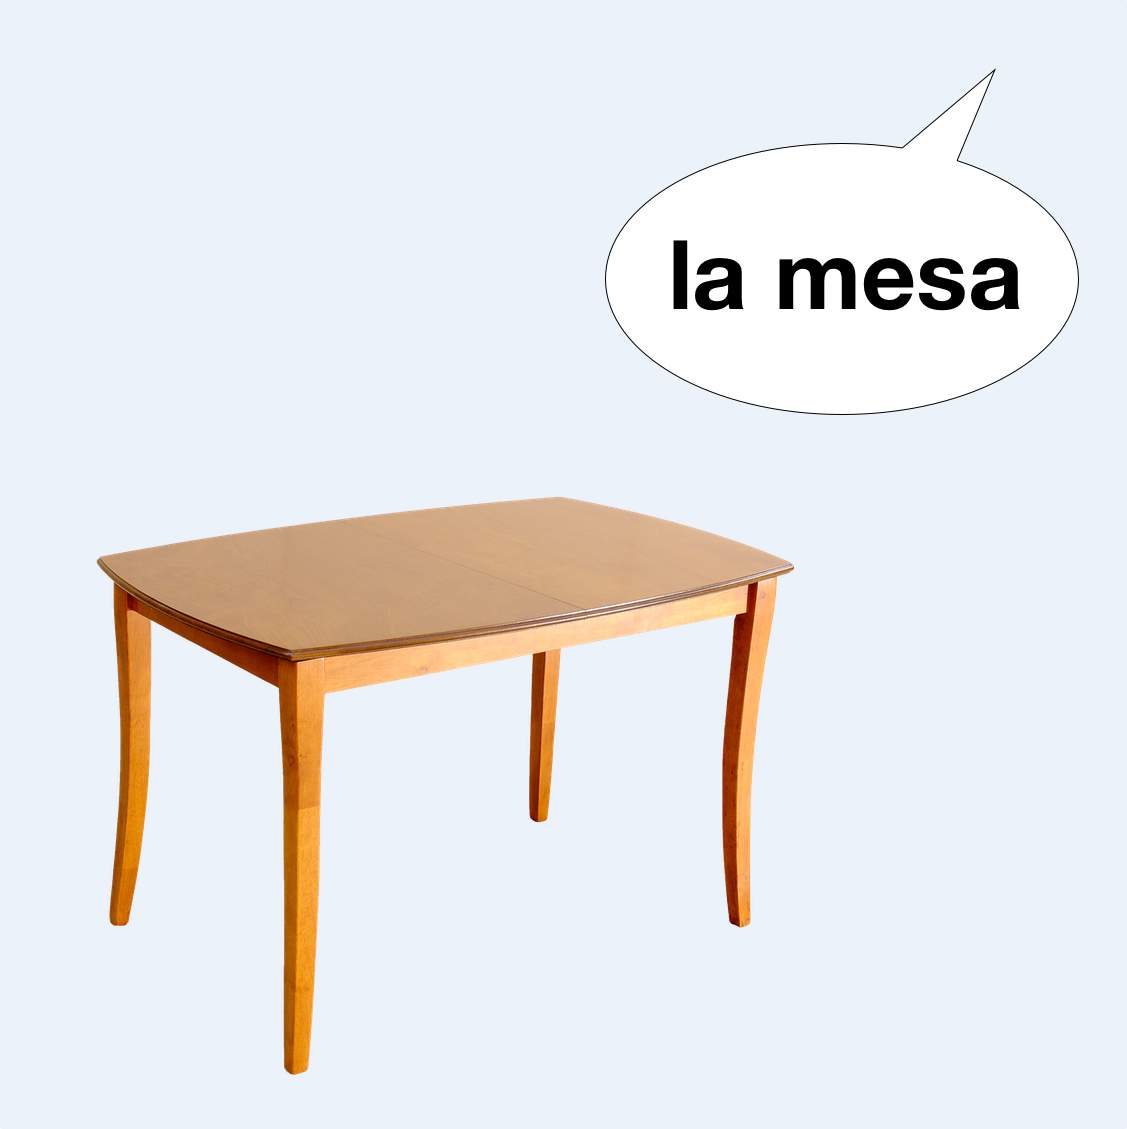 A table with a speech bubble that says la messa for an audience.